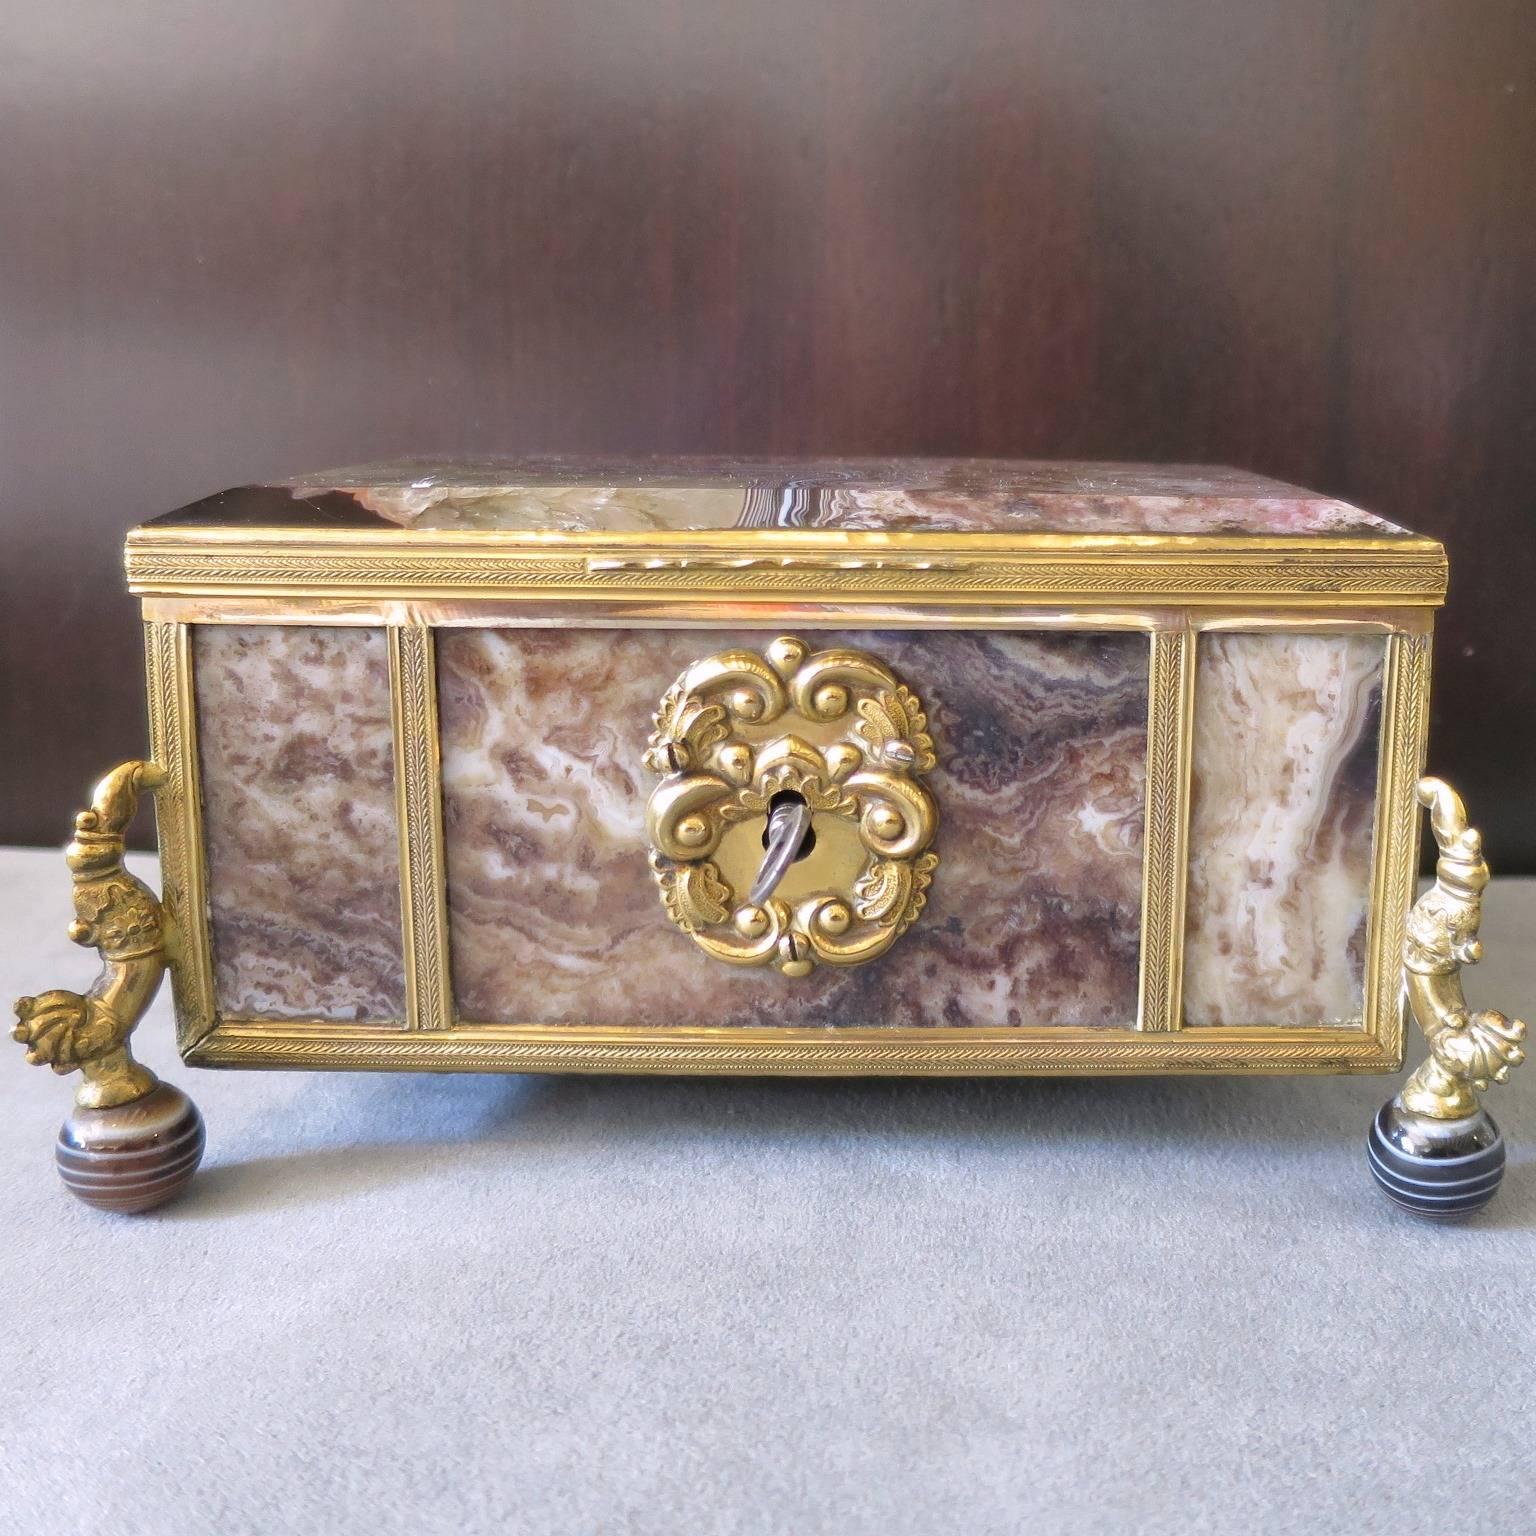 Decorative object.
Precious Casket, in Jasper .
Italian Jewelry box 19th century.
Dolphin shape feet, engraved golden bronze, ending by small Jasper Balls. Finely chopped lock in golden bronze.
The Jasper slices are crystalized in some spots